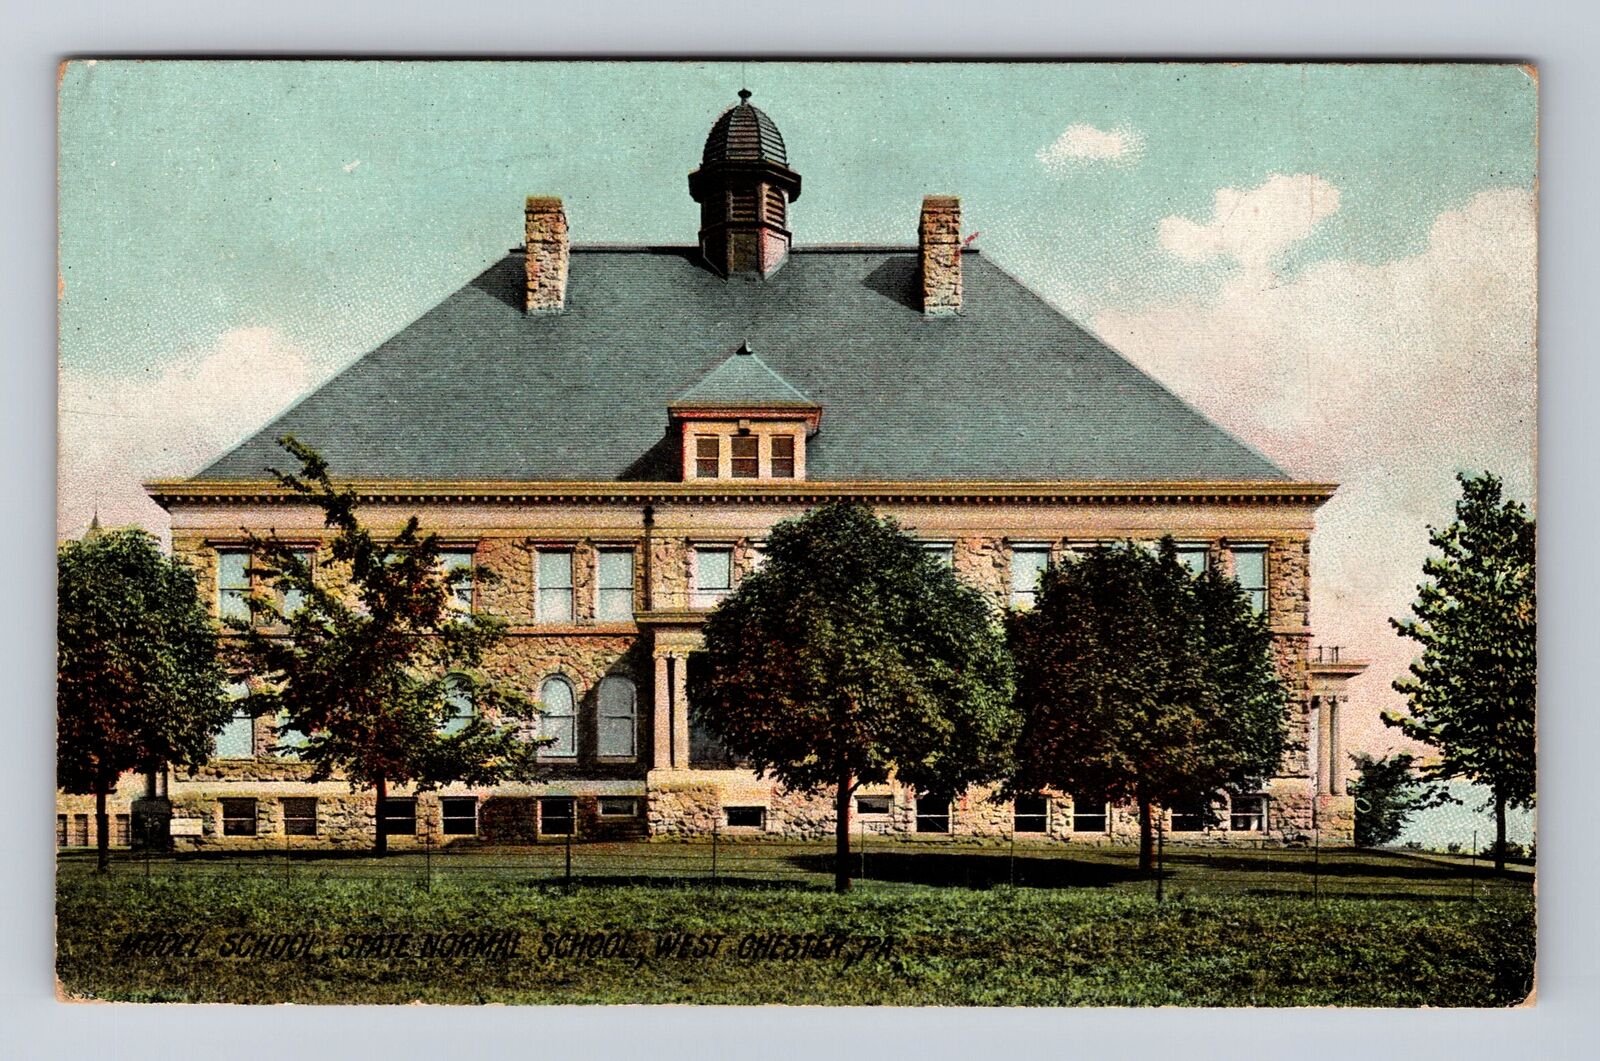 West Chester PA-Pennsylvania, State Normal School, Antique, Vintage Postcard